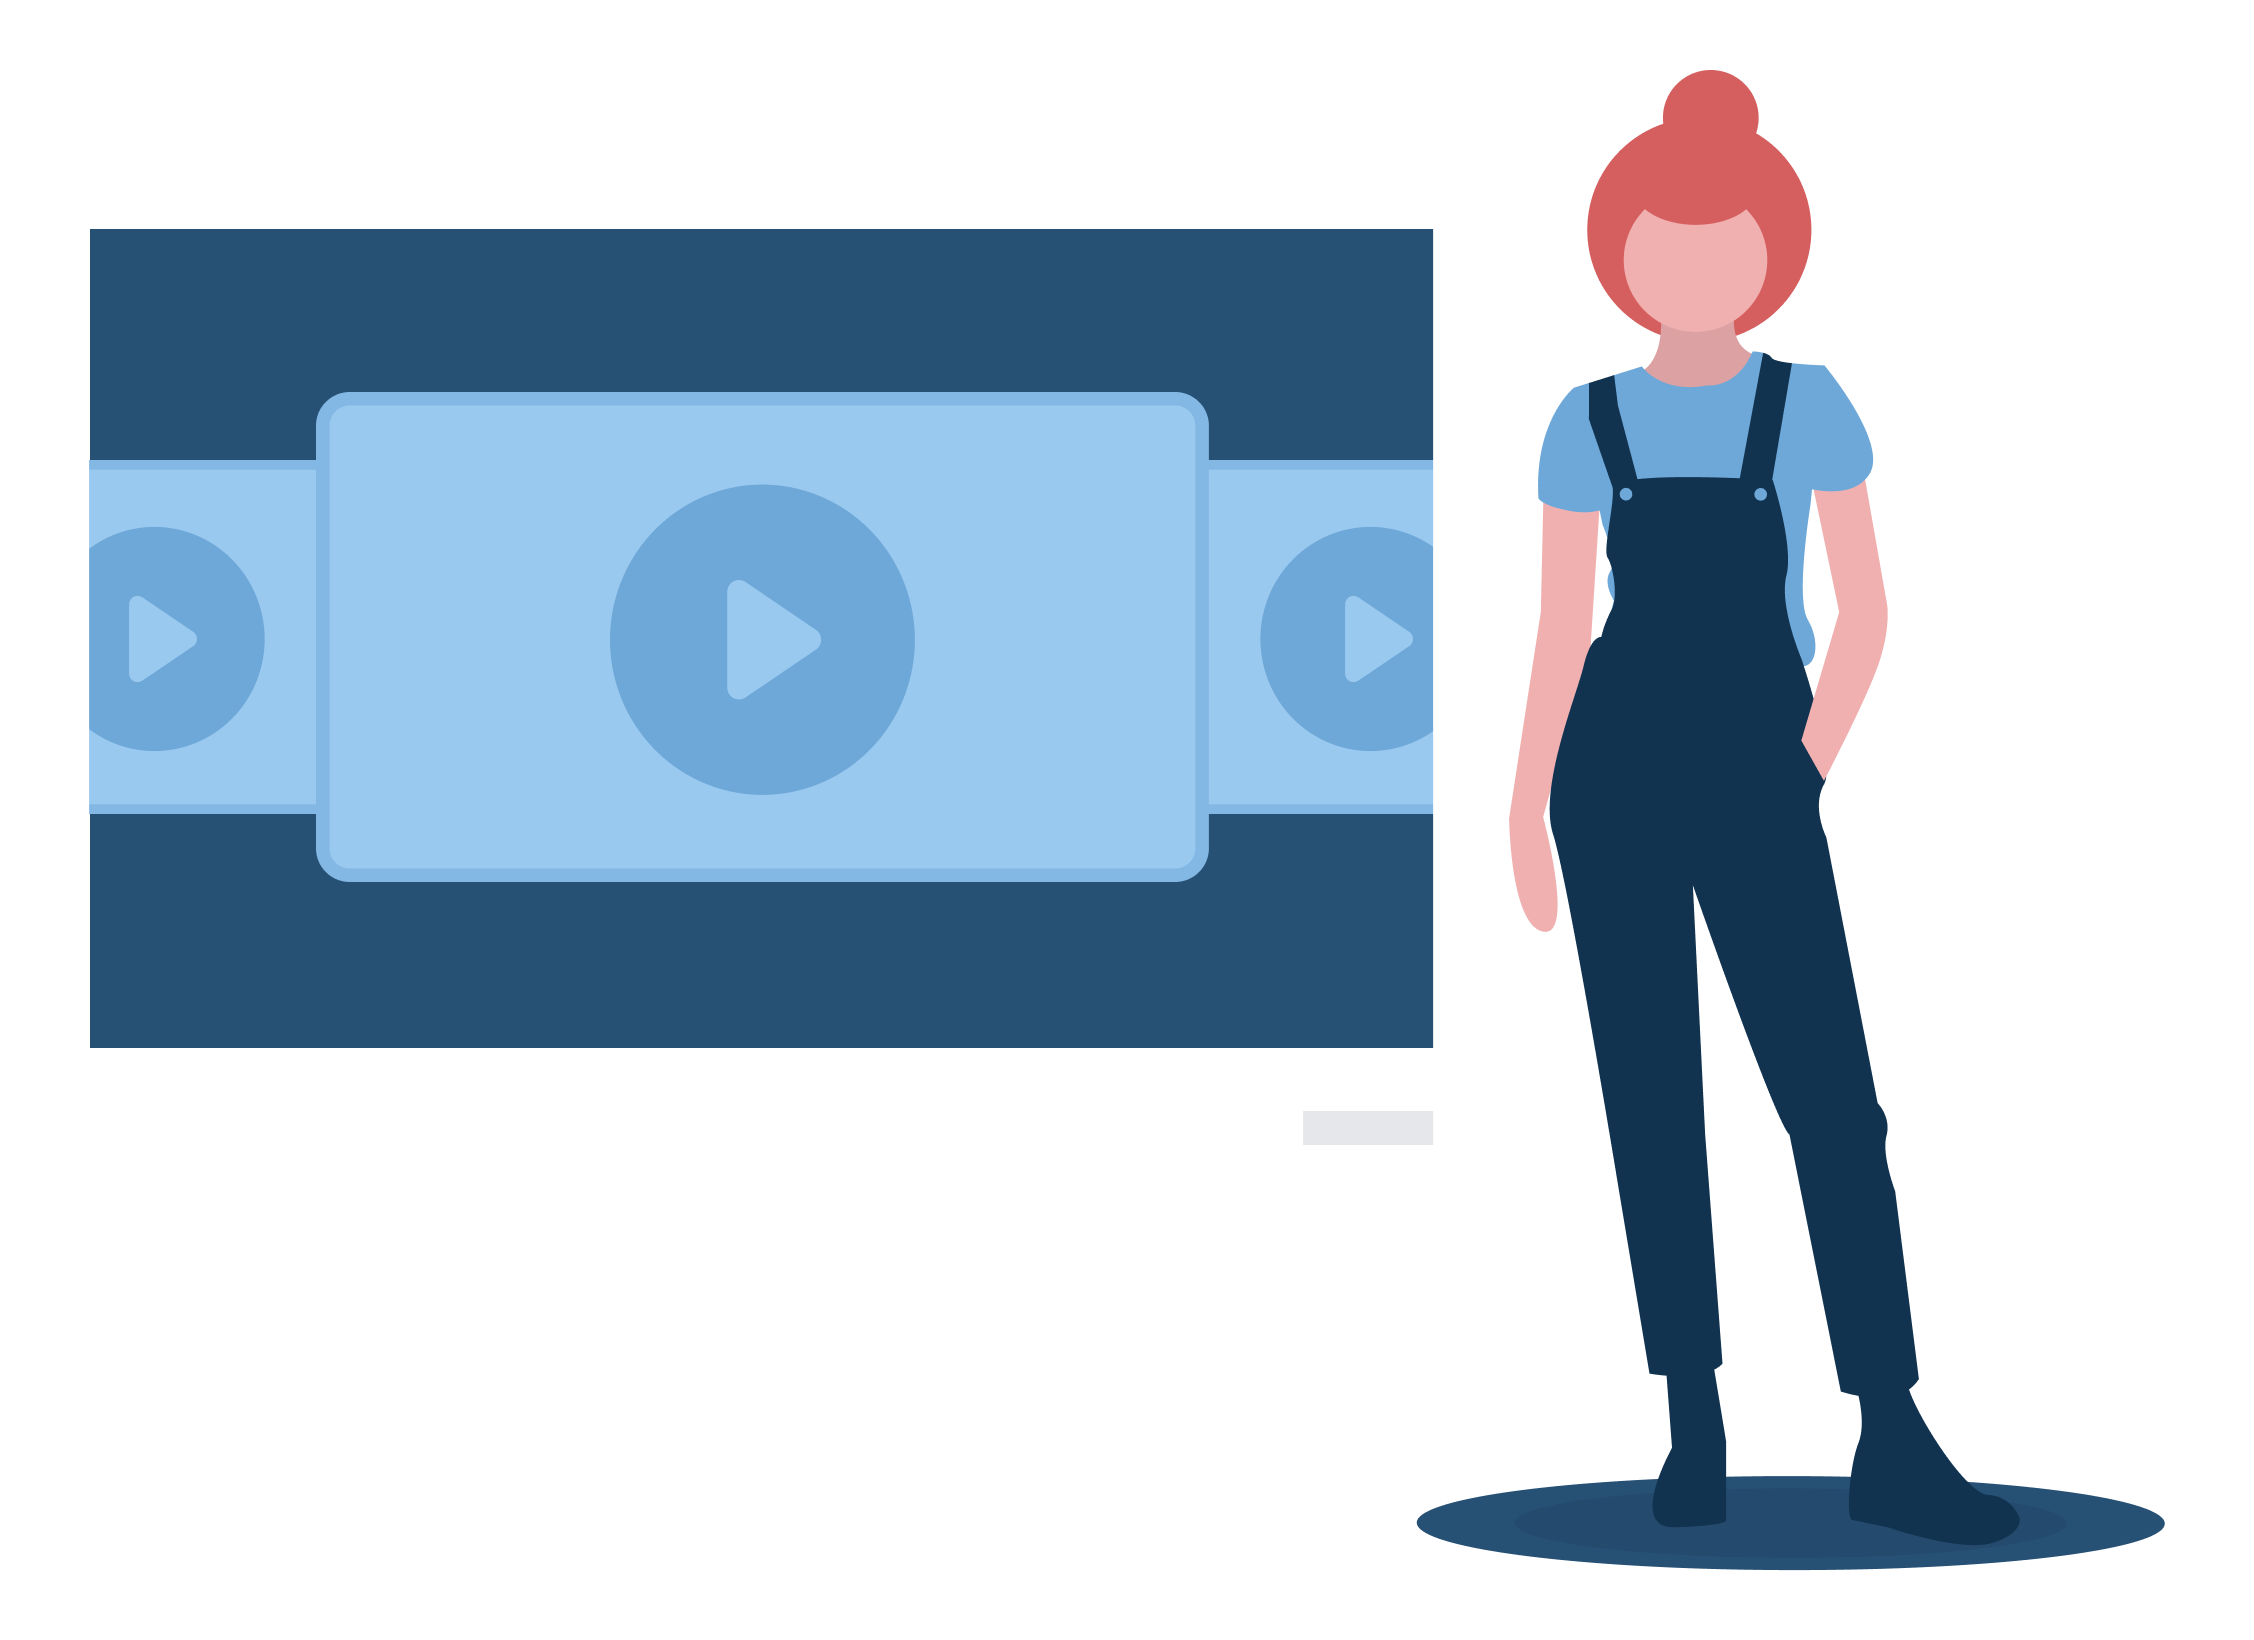 Illustration of a figure presenting video clips as part of a larger composition